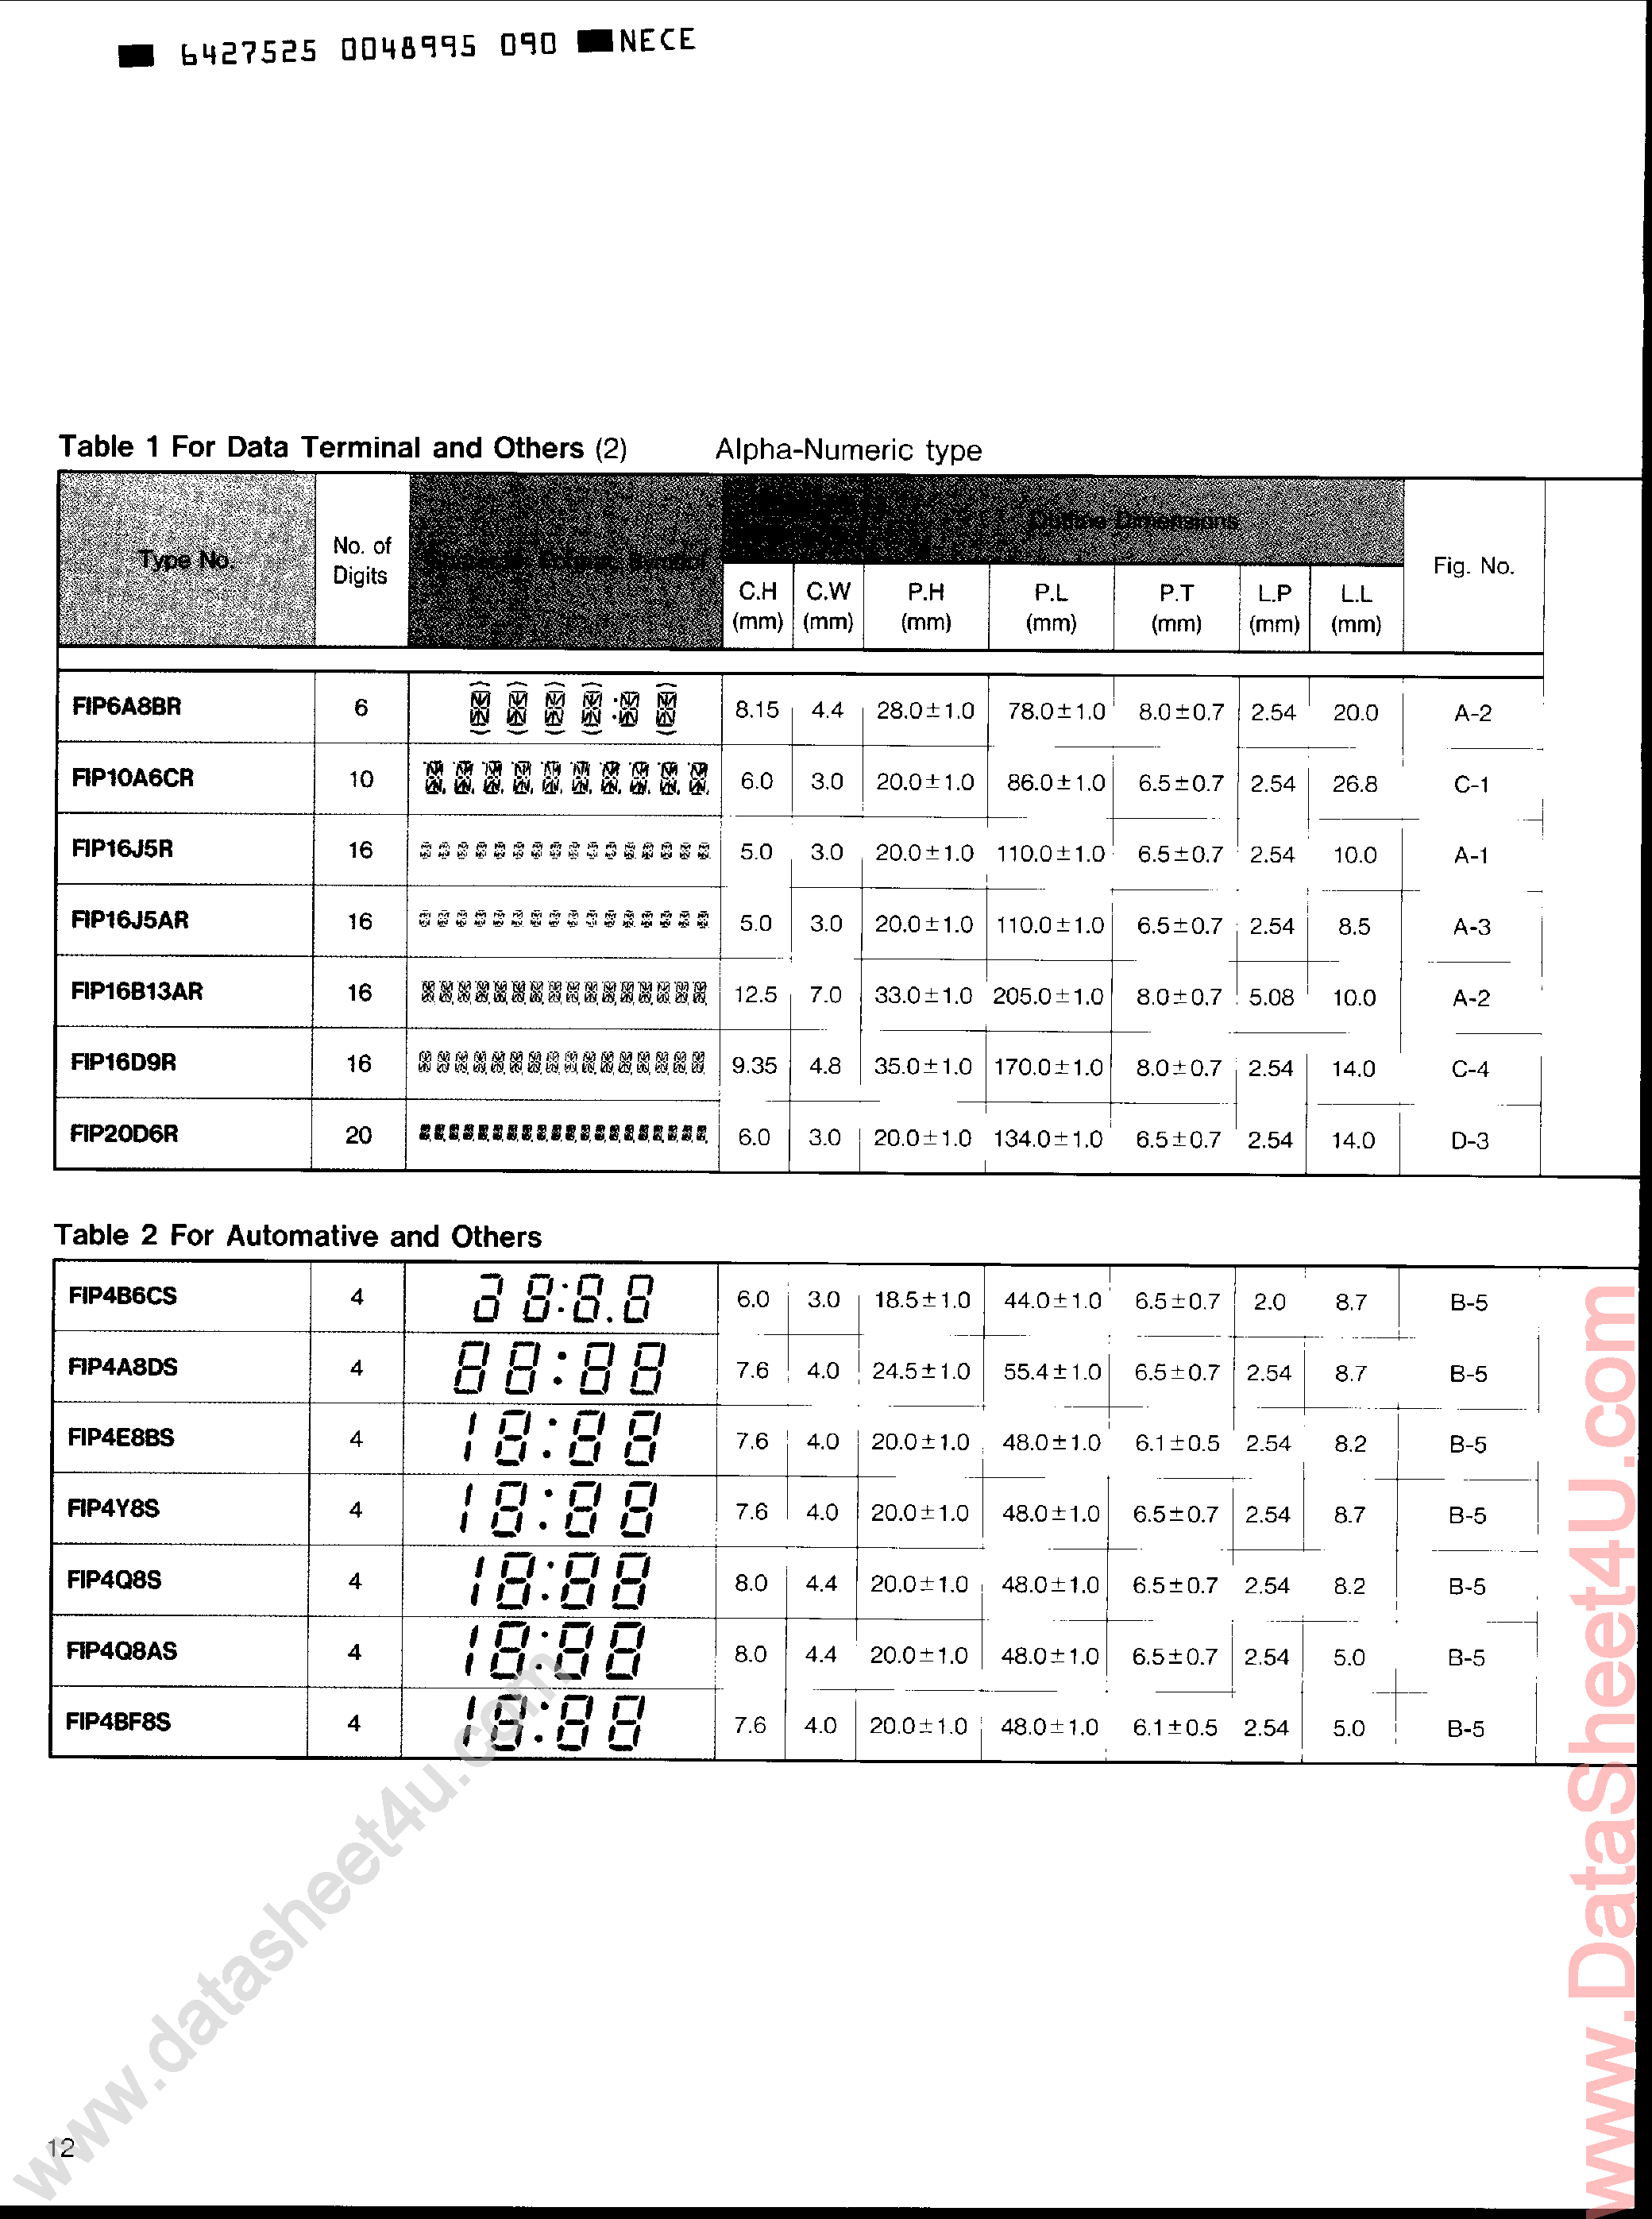 Datasheet FIP10A6CR - (FIPxxx) Alpha Numeric Type page 1